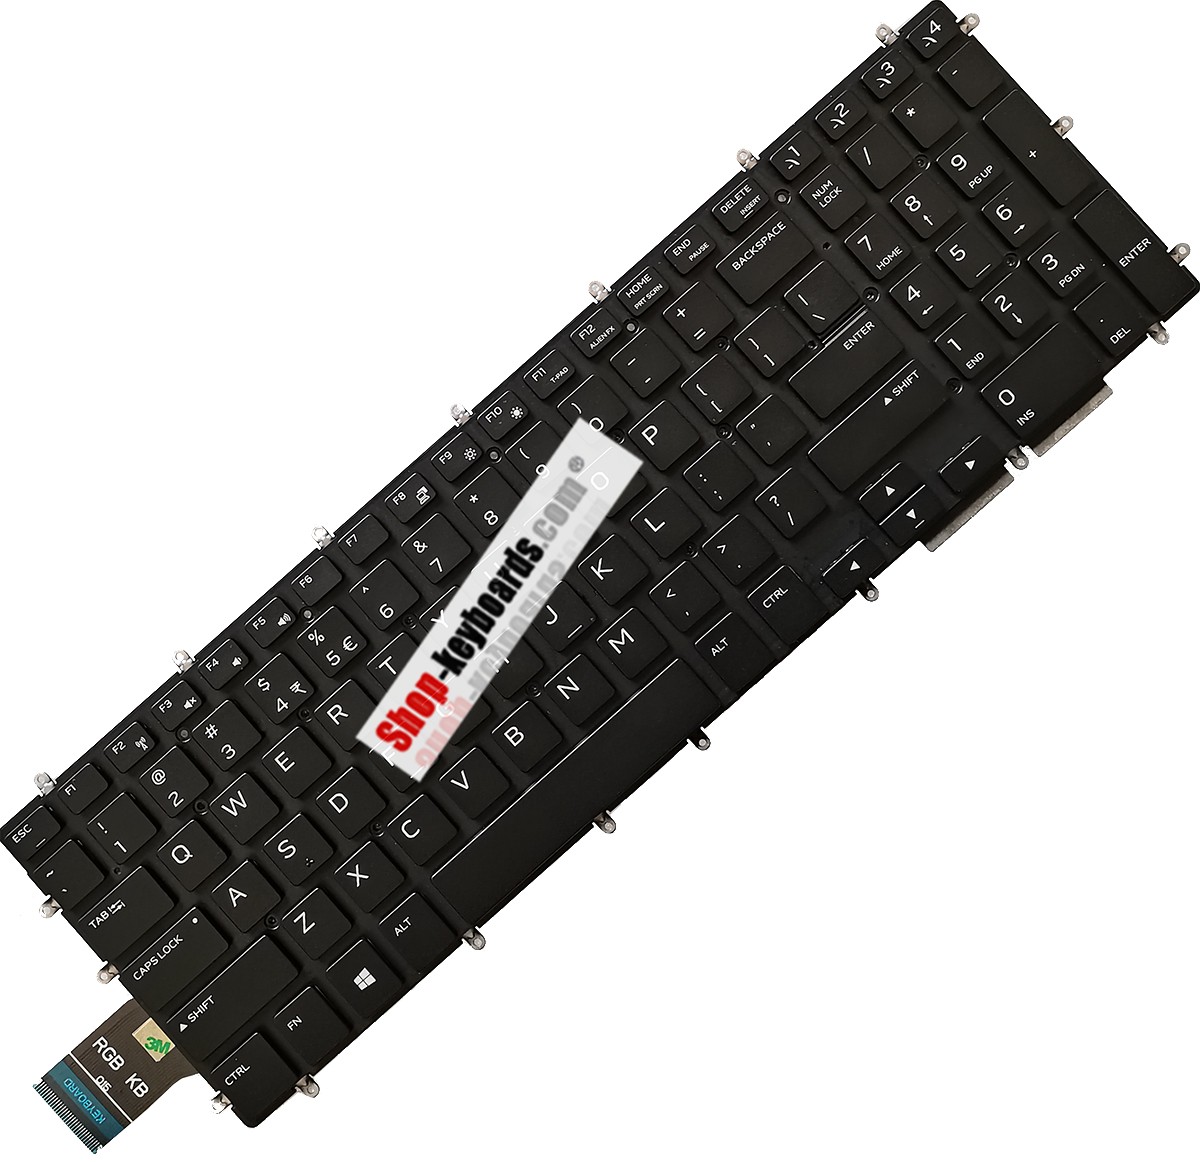 Dell SG-95010-2EA Keyboard replacement